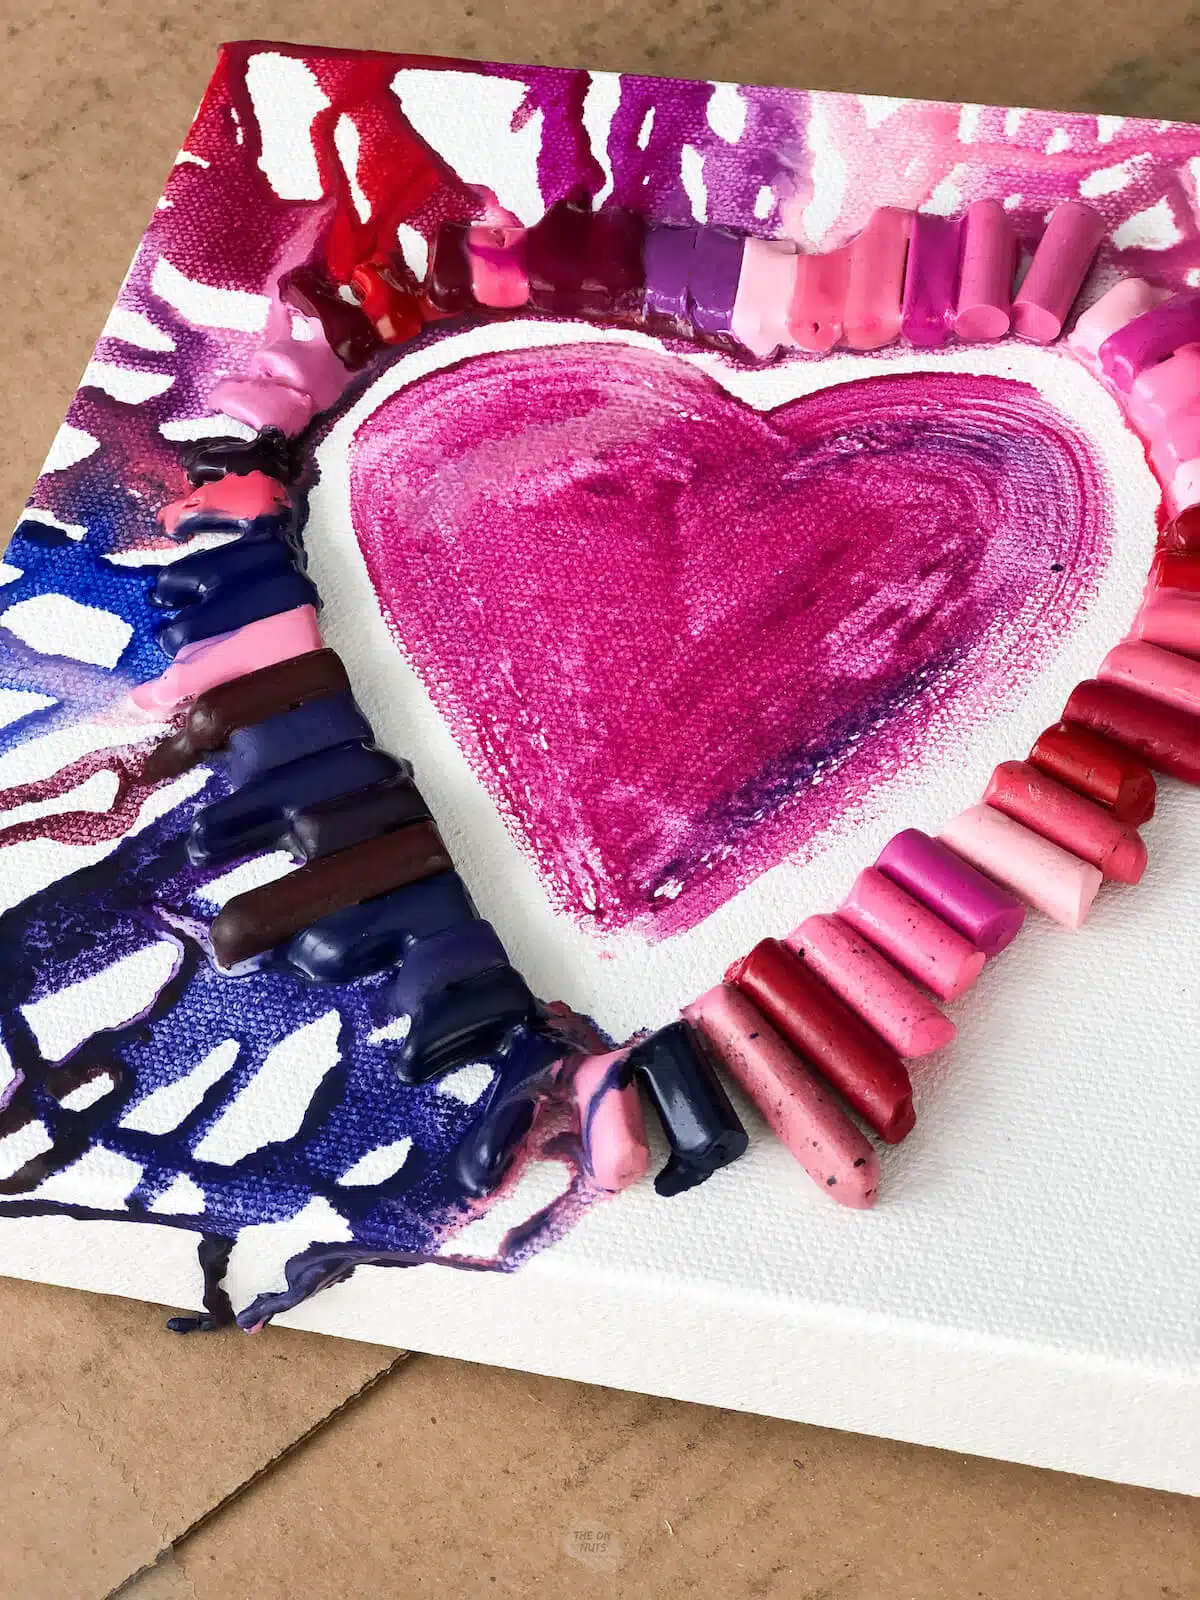 heart painted on canvas with crayons melted partially around the heart.